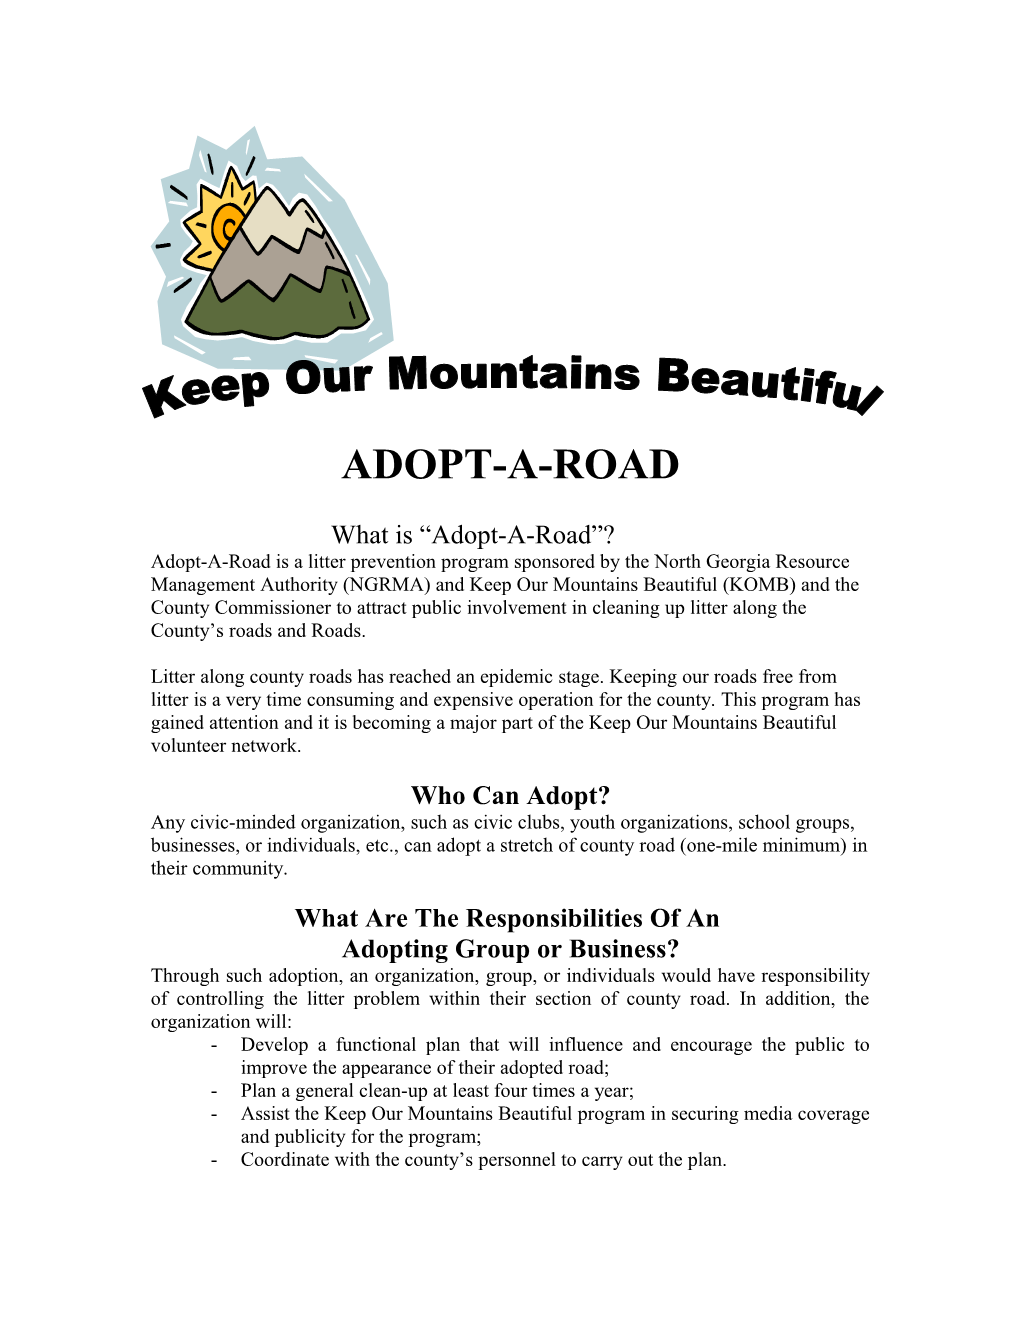 What Is Adopt-A-Highway